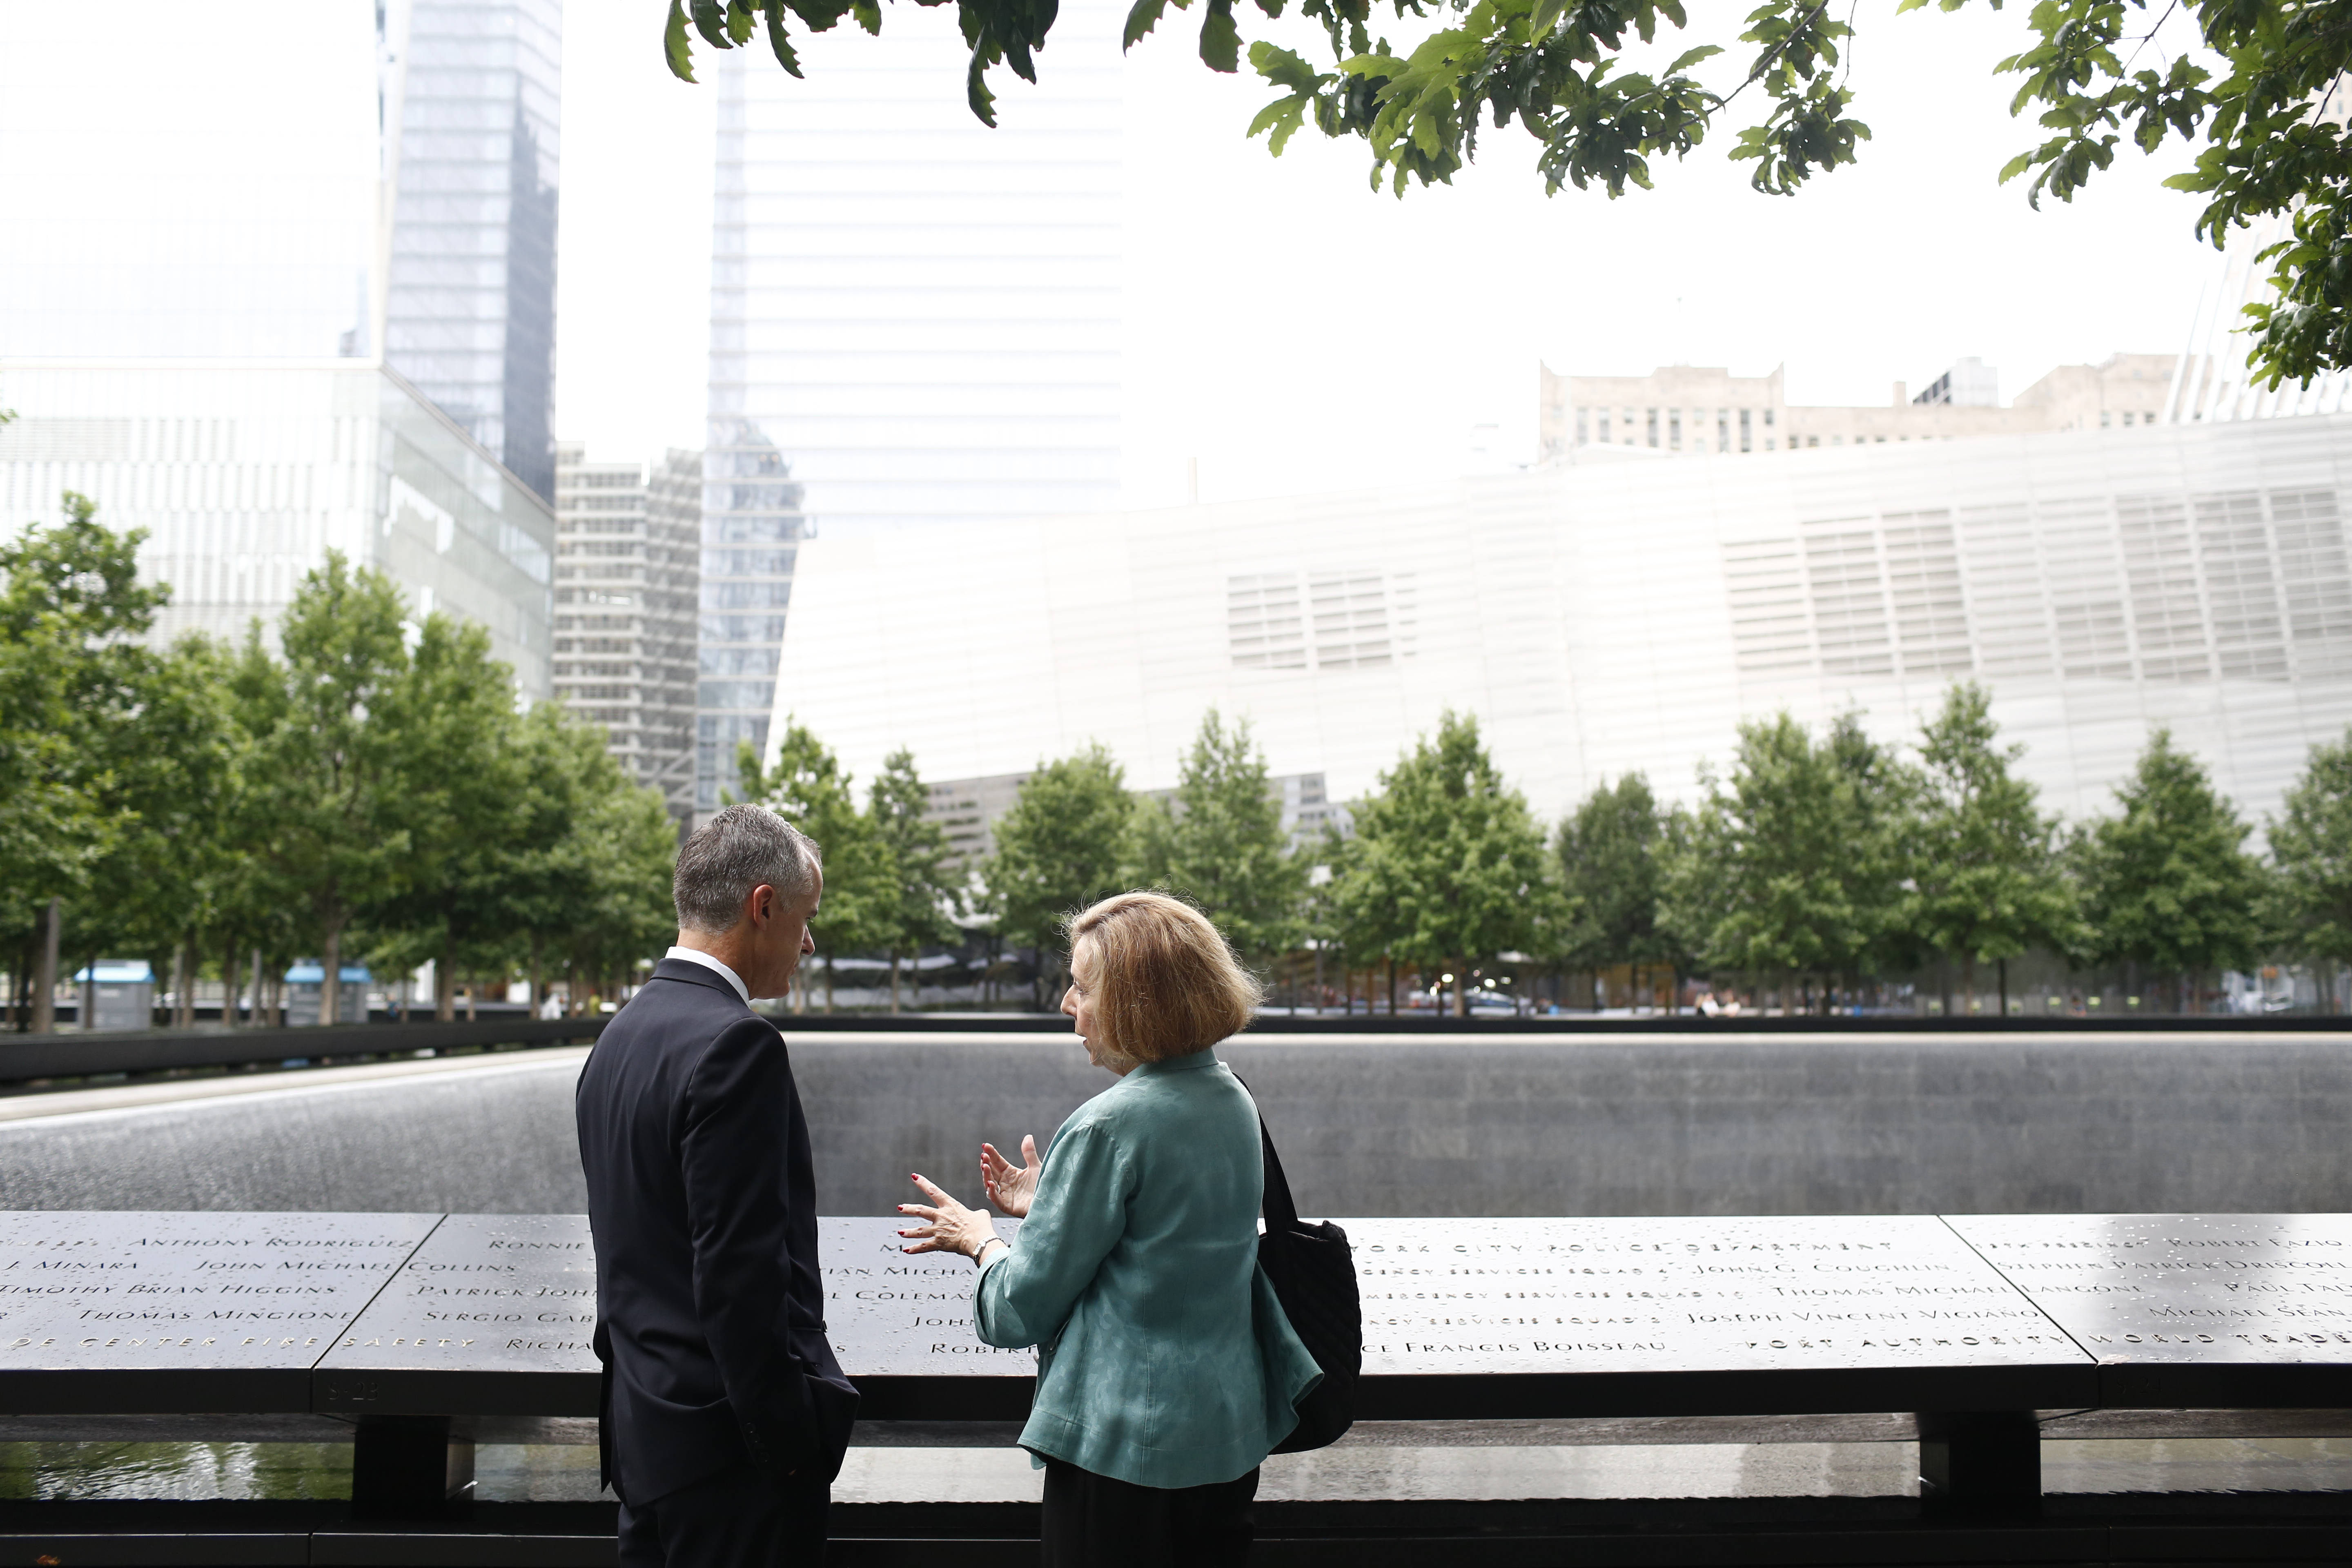 FBI Deputy Director Andrew McCabe and 9/11 Memorial Museum Director Alice Greenwald speak beside a reflecting pool at the 9/11 Memorial.